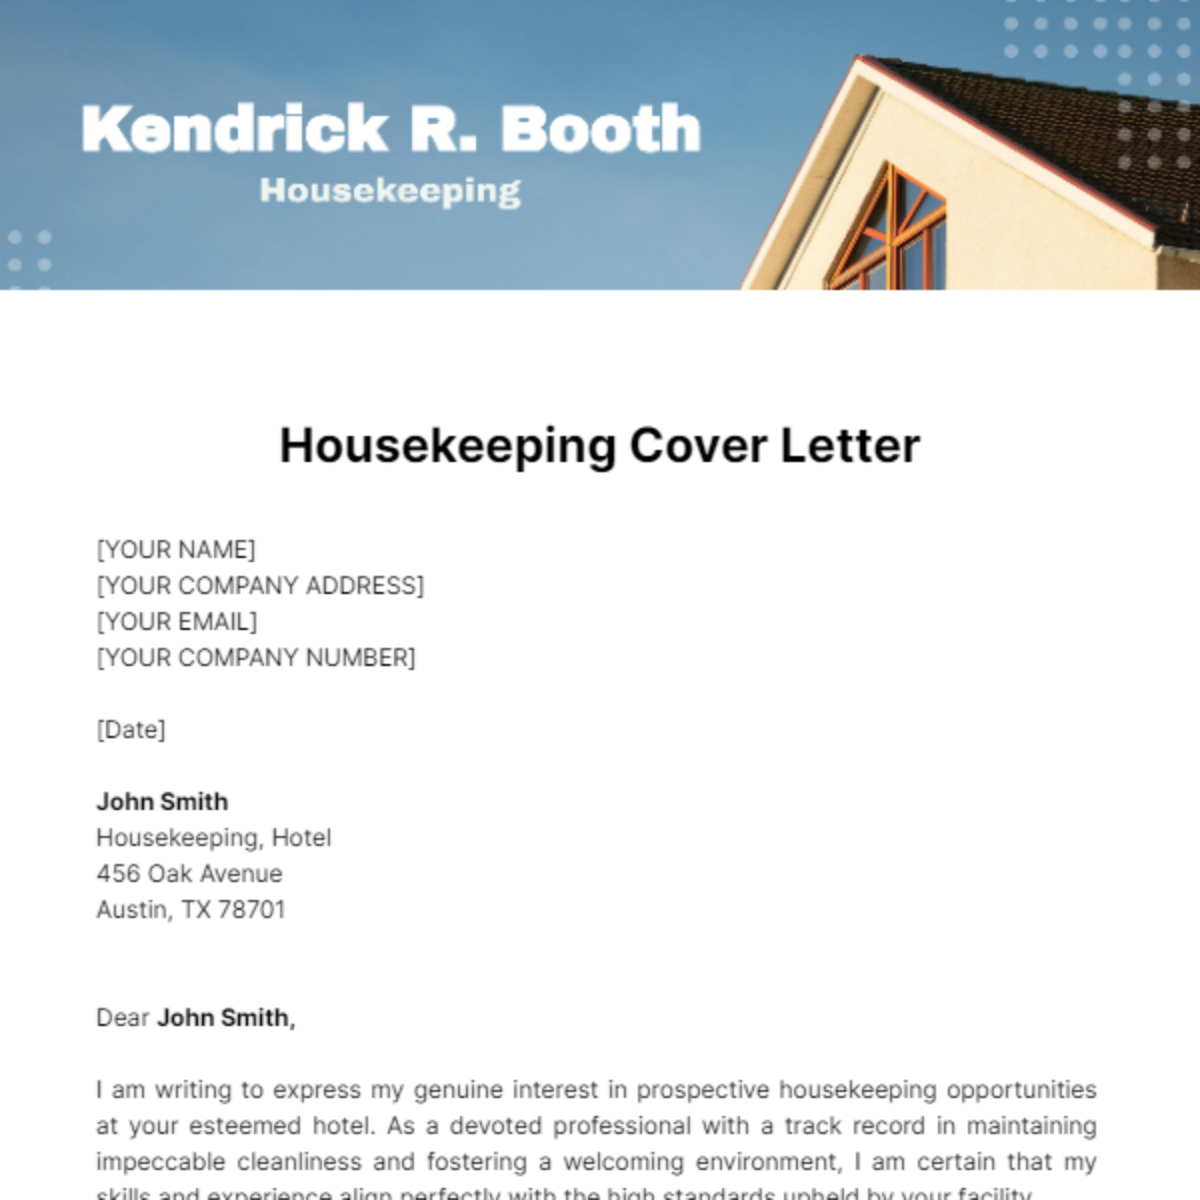 Housekeeping Cover Letter Template